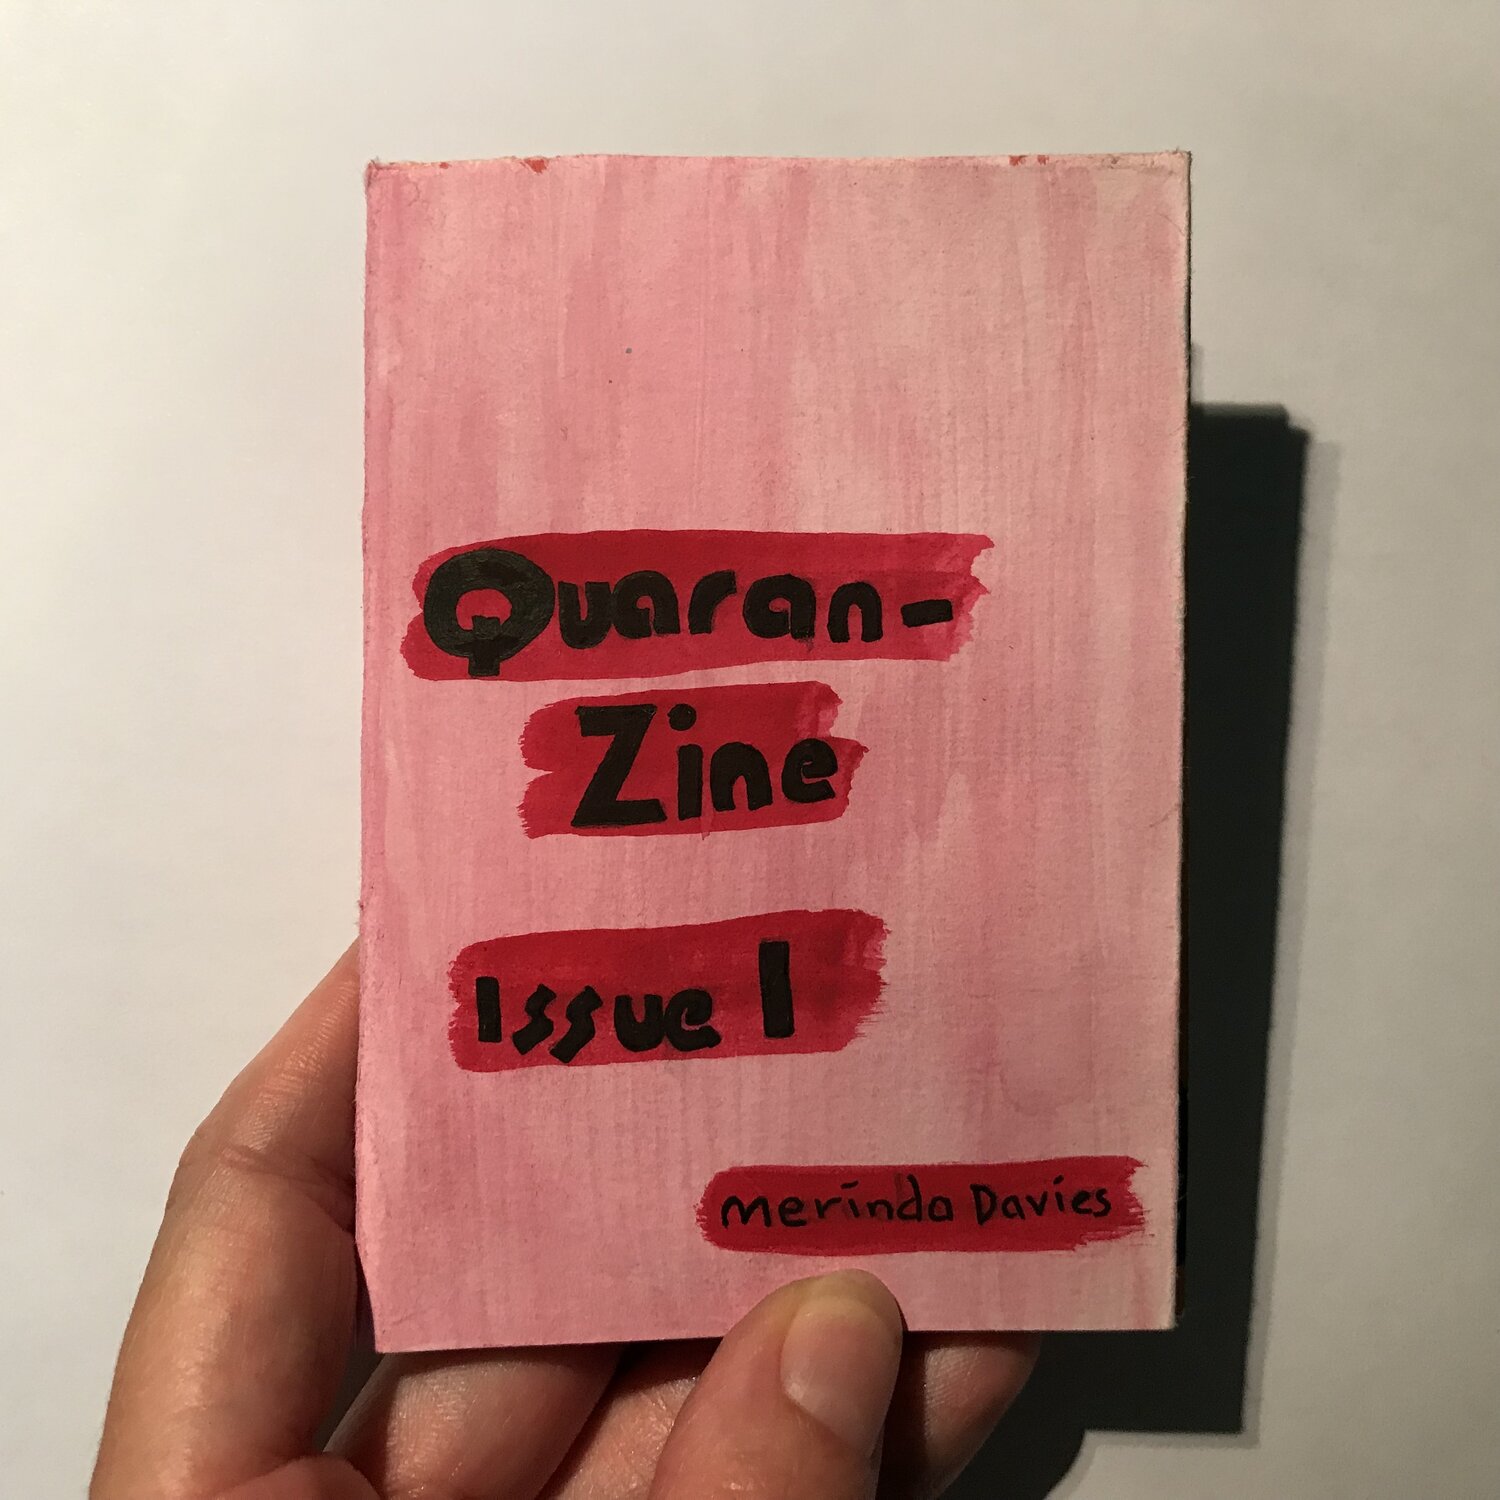 photo of hand holding zine: red title on pink background